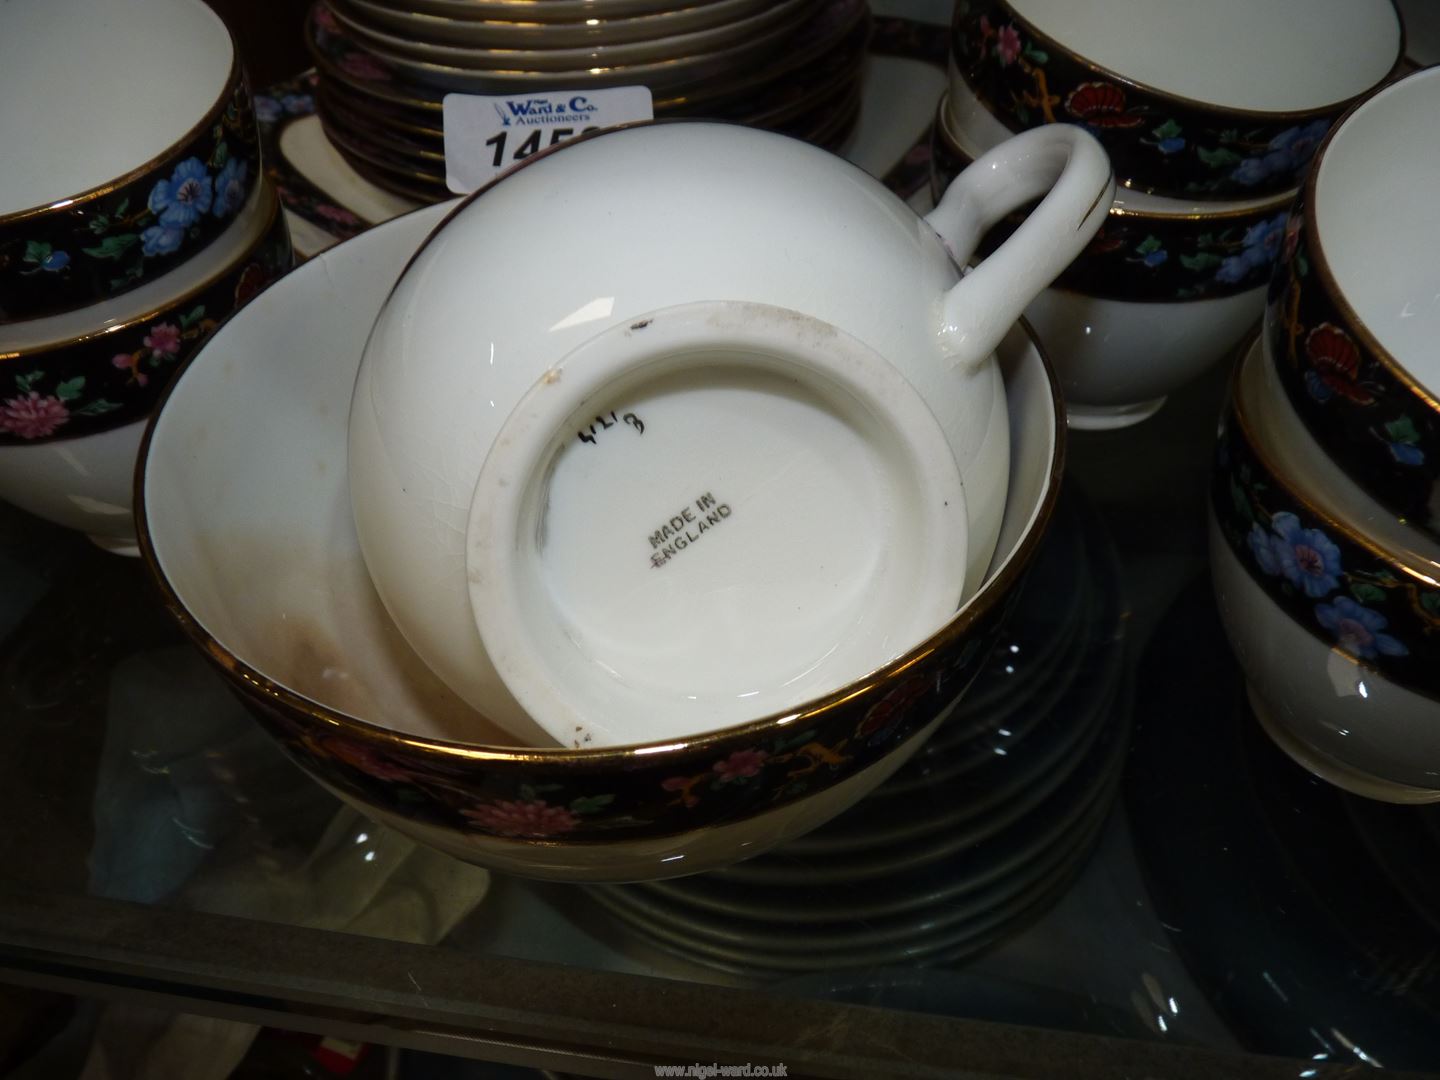 A Teaset including six cups and saucers, cake plate, tea plates, milk jug and sugar bowl, - Image 2 of 2